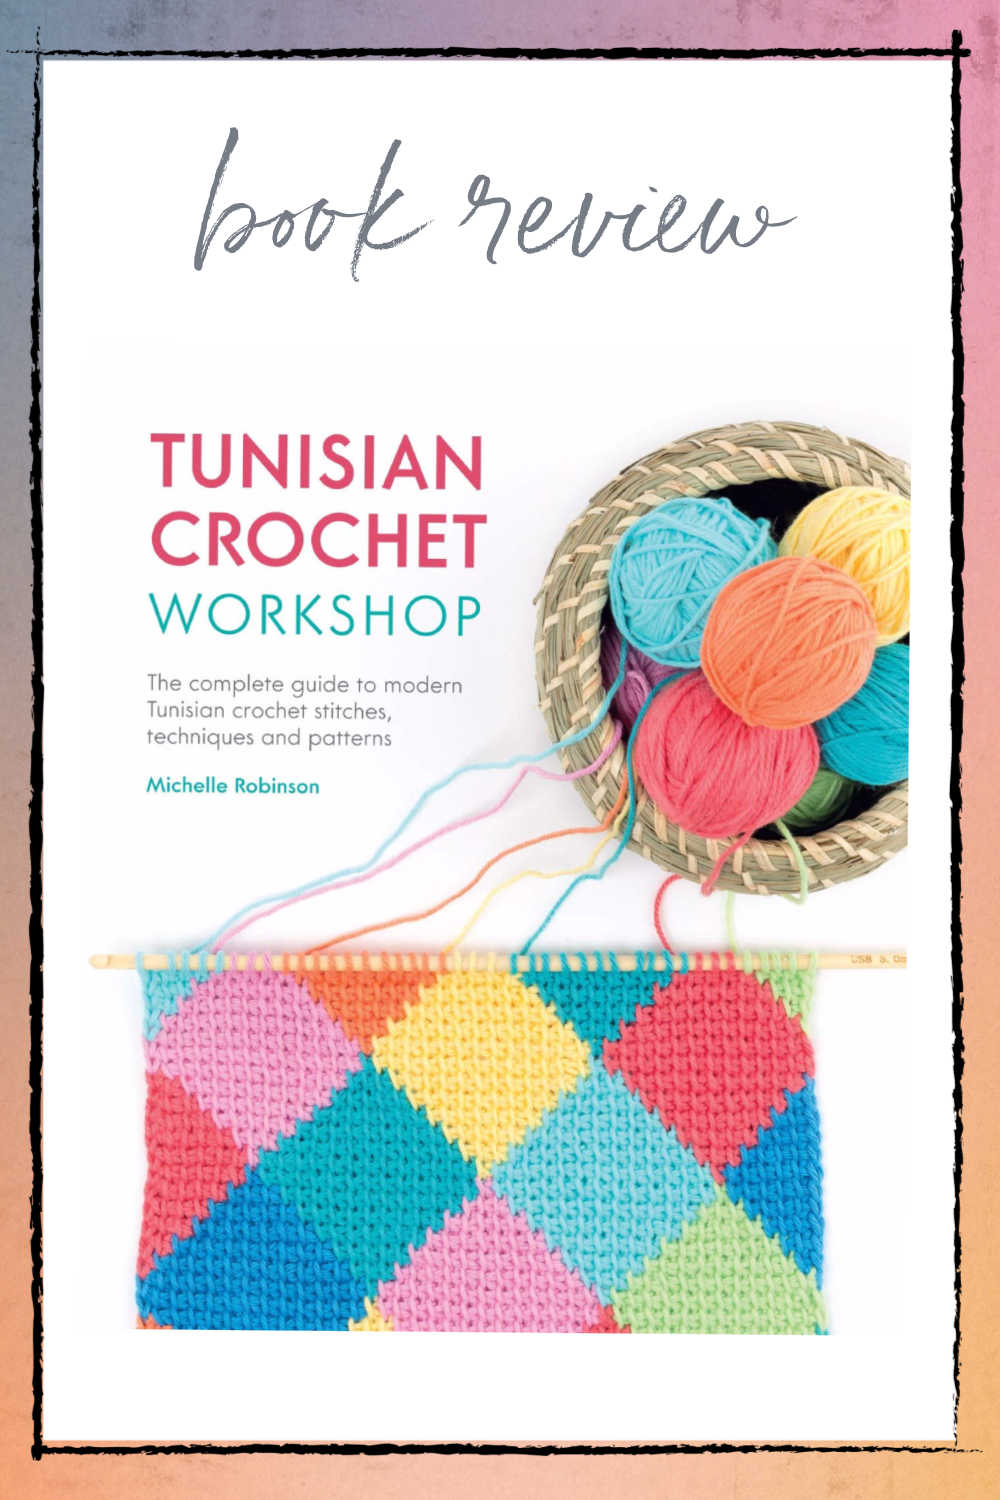 Book - Tunisian Crochet for Beginners - That Yarn Place